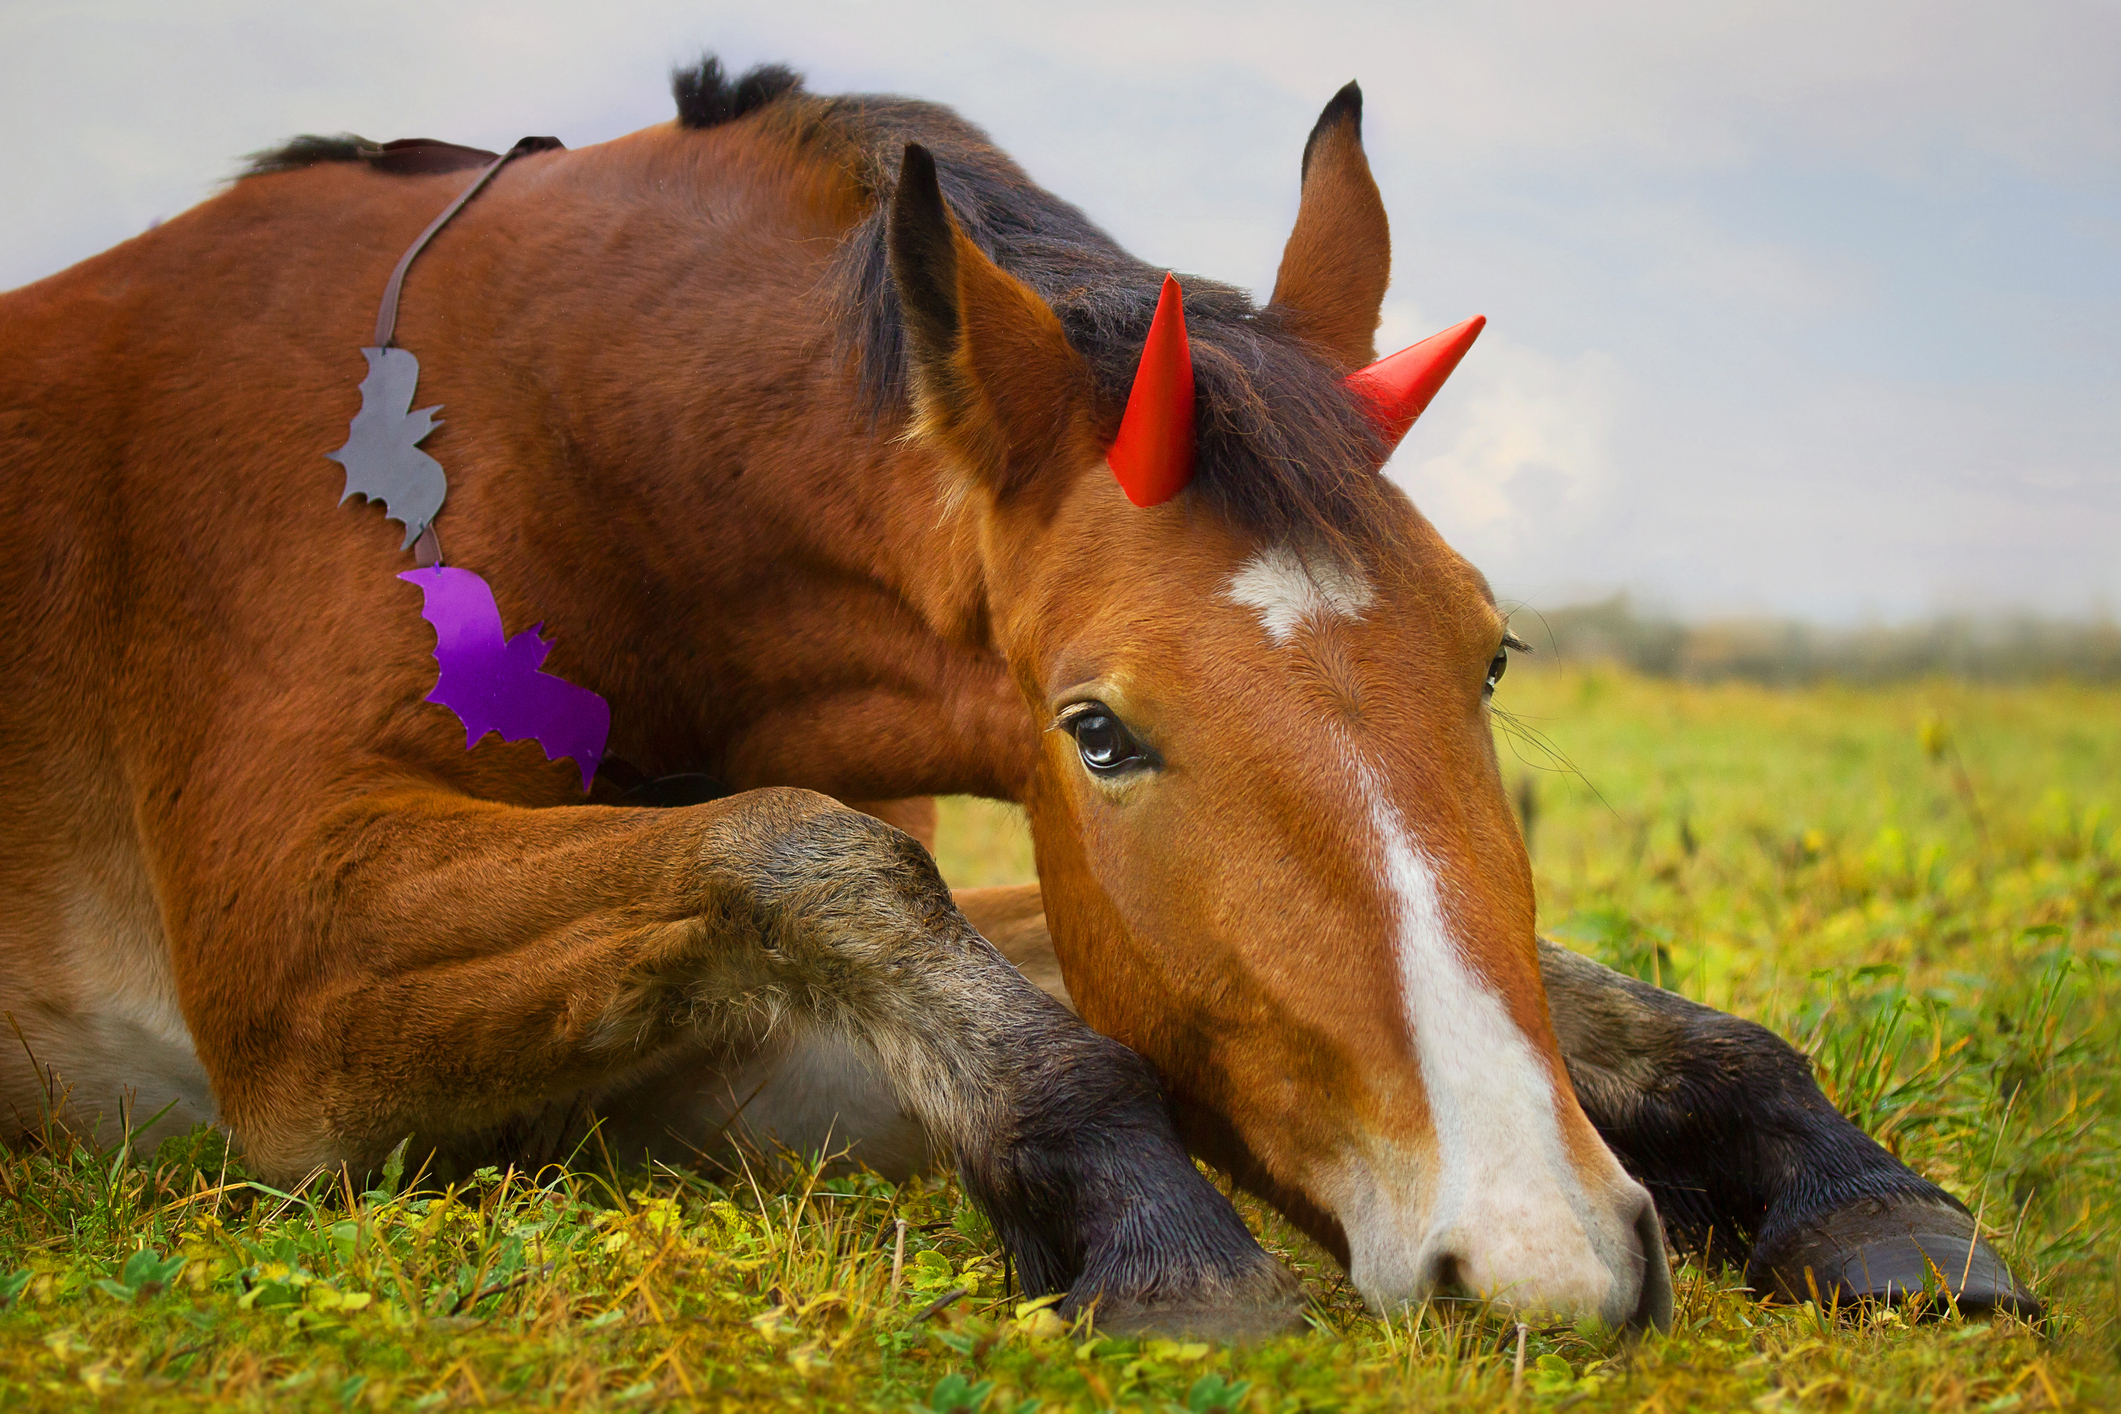 horse wearing horns and Halloween decoration lying in grass.